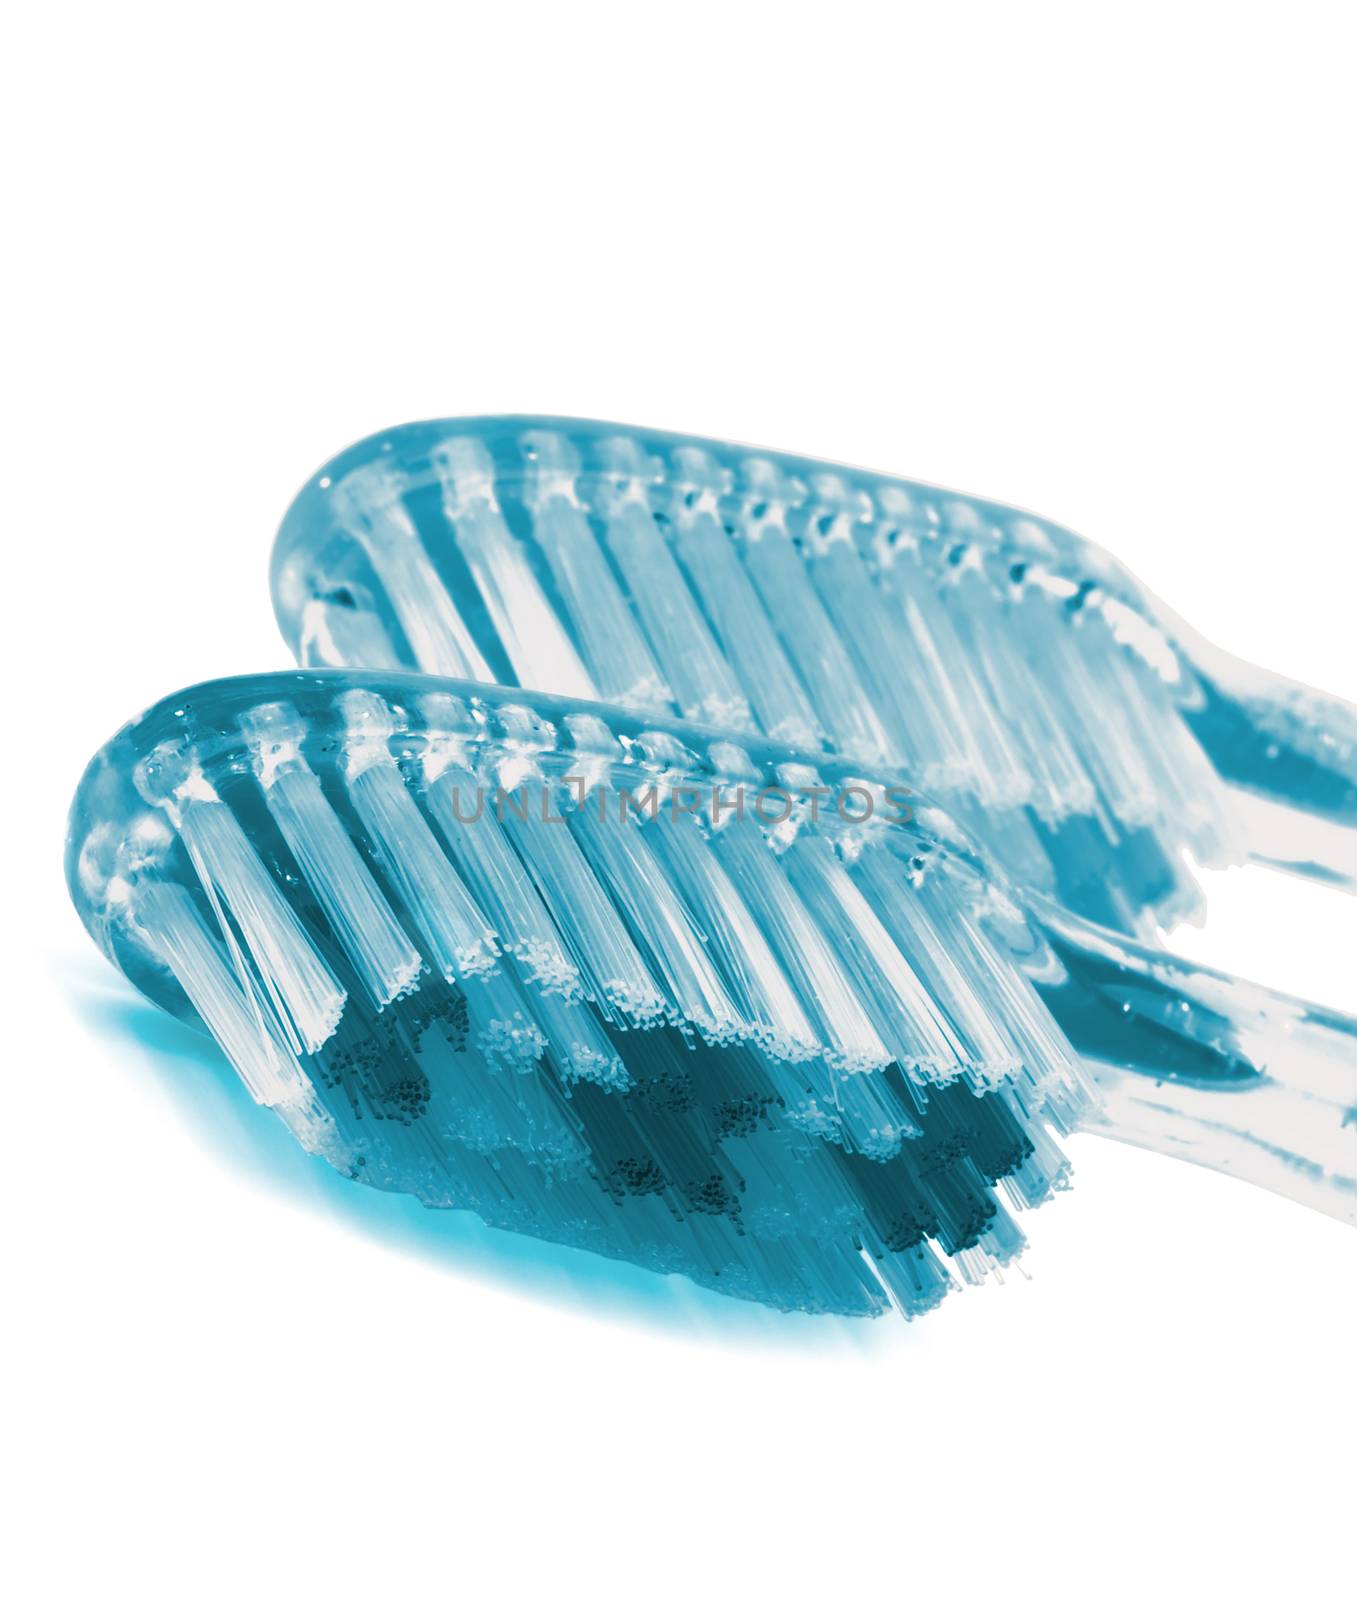 Two Transparent Toothbrushes isolated on white background. Monochrome Turquoise View